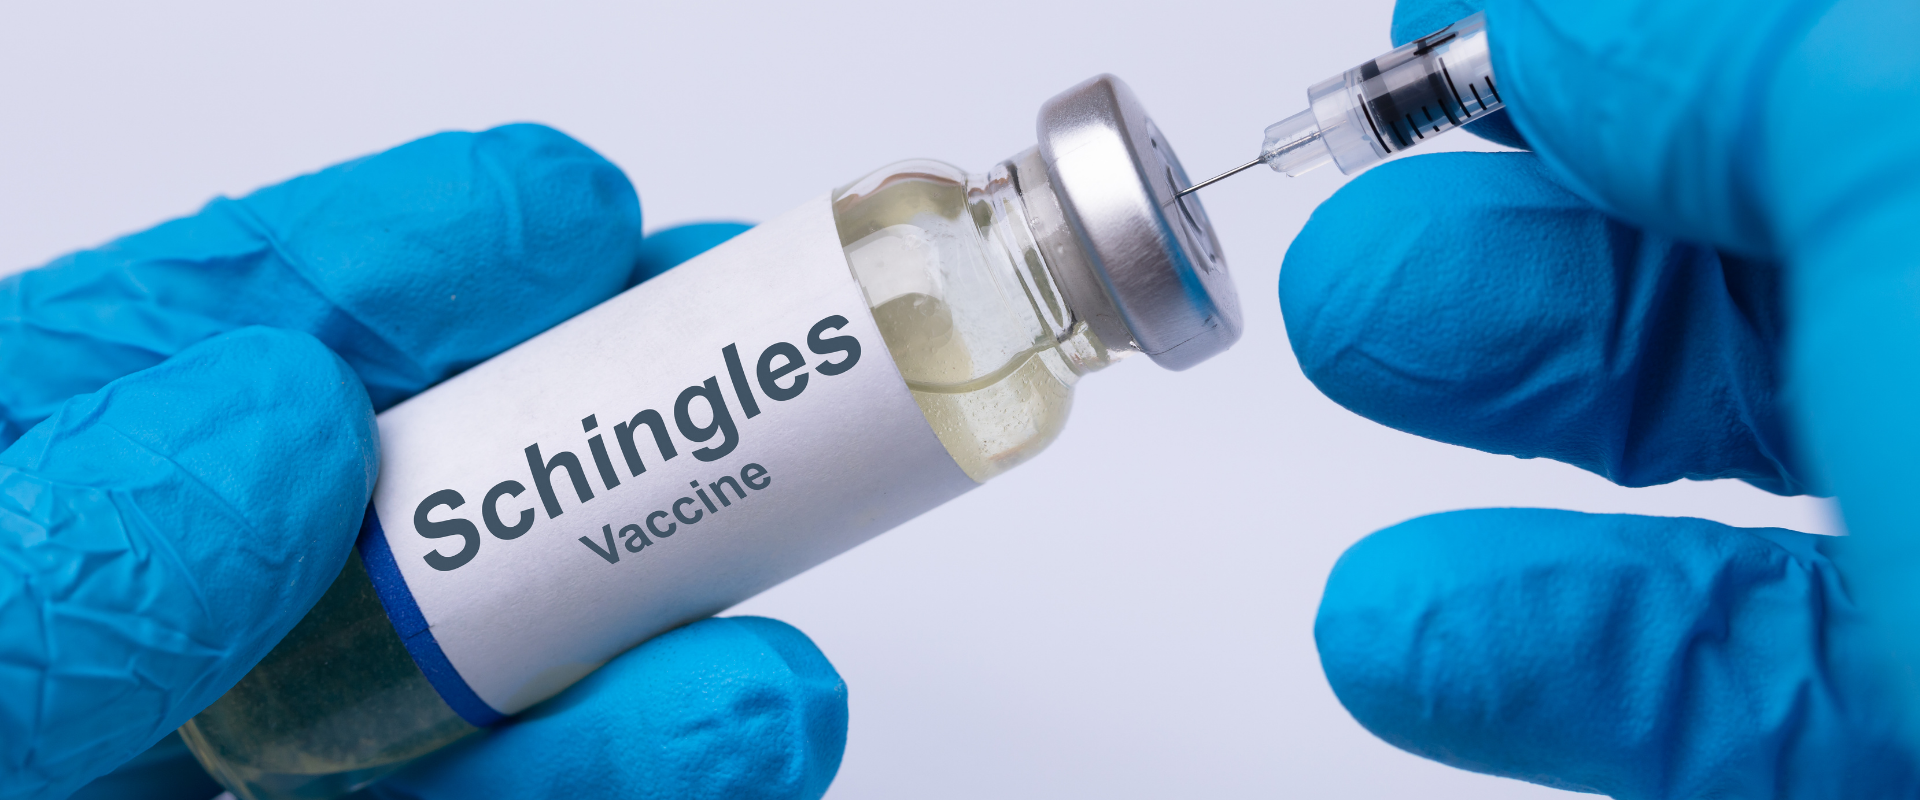 The Shingles Vaccine in Birmingham is available at King